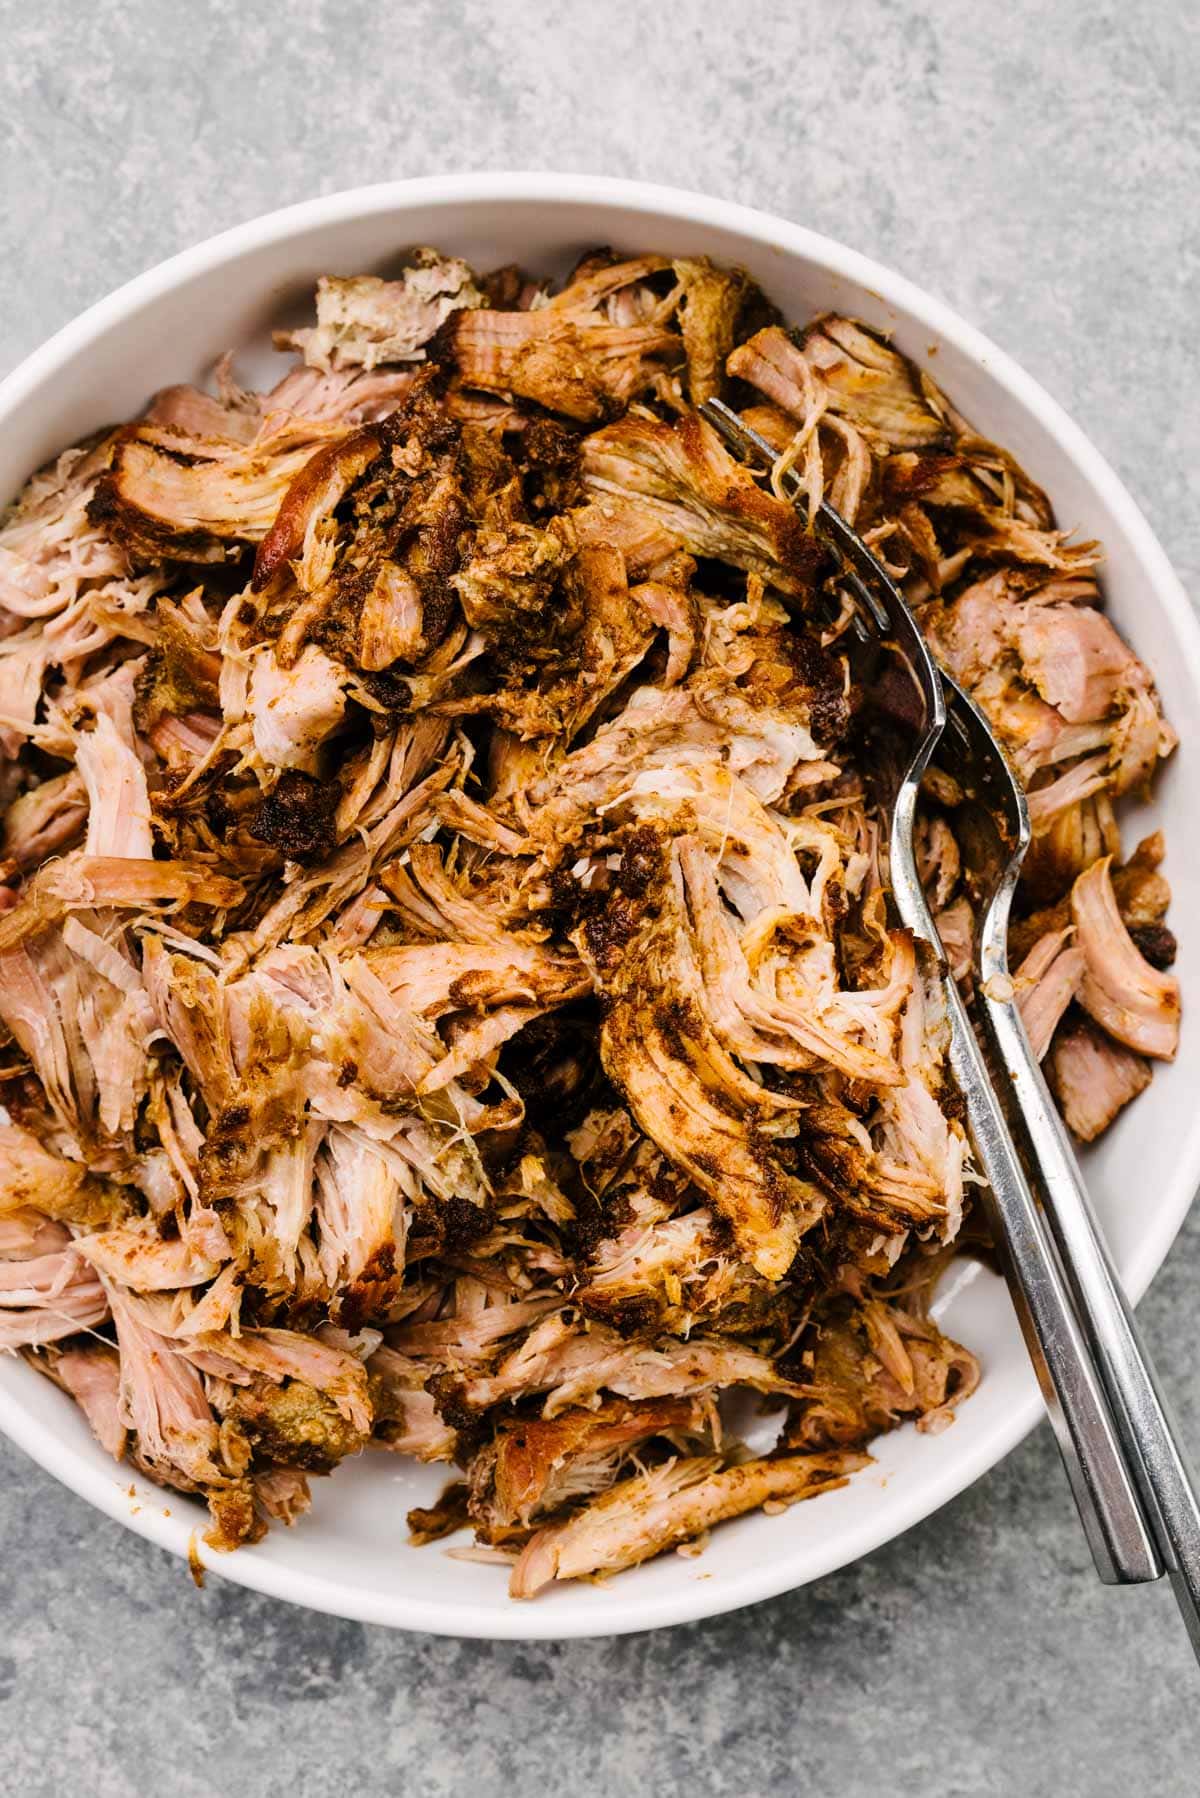 Shredded pulled pork in a large white bowl with two forks.